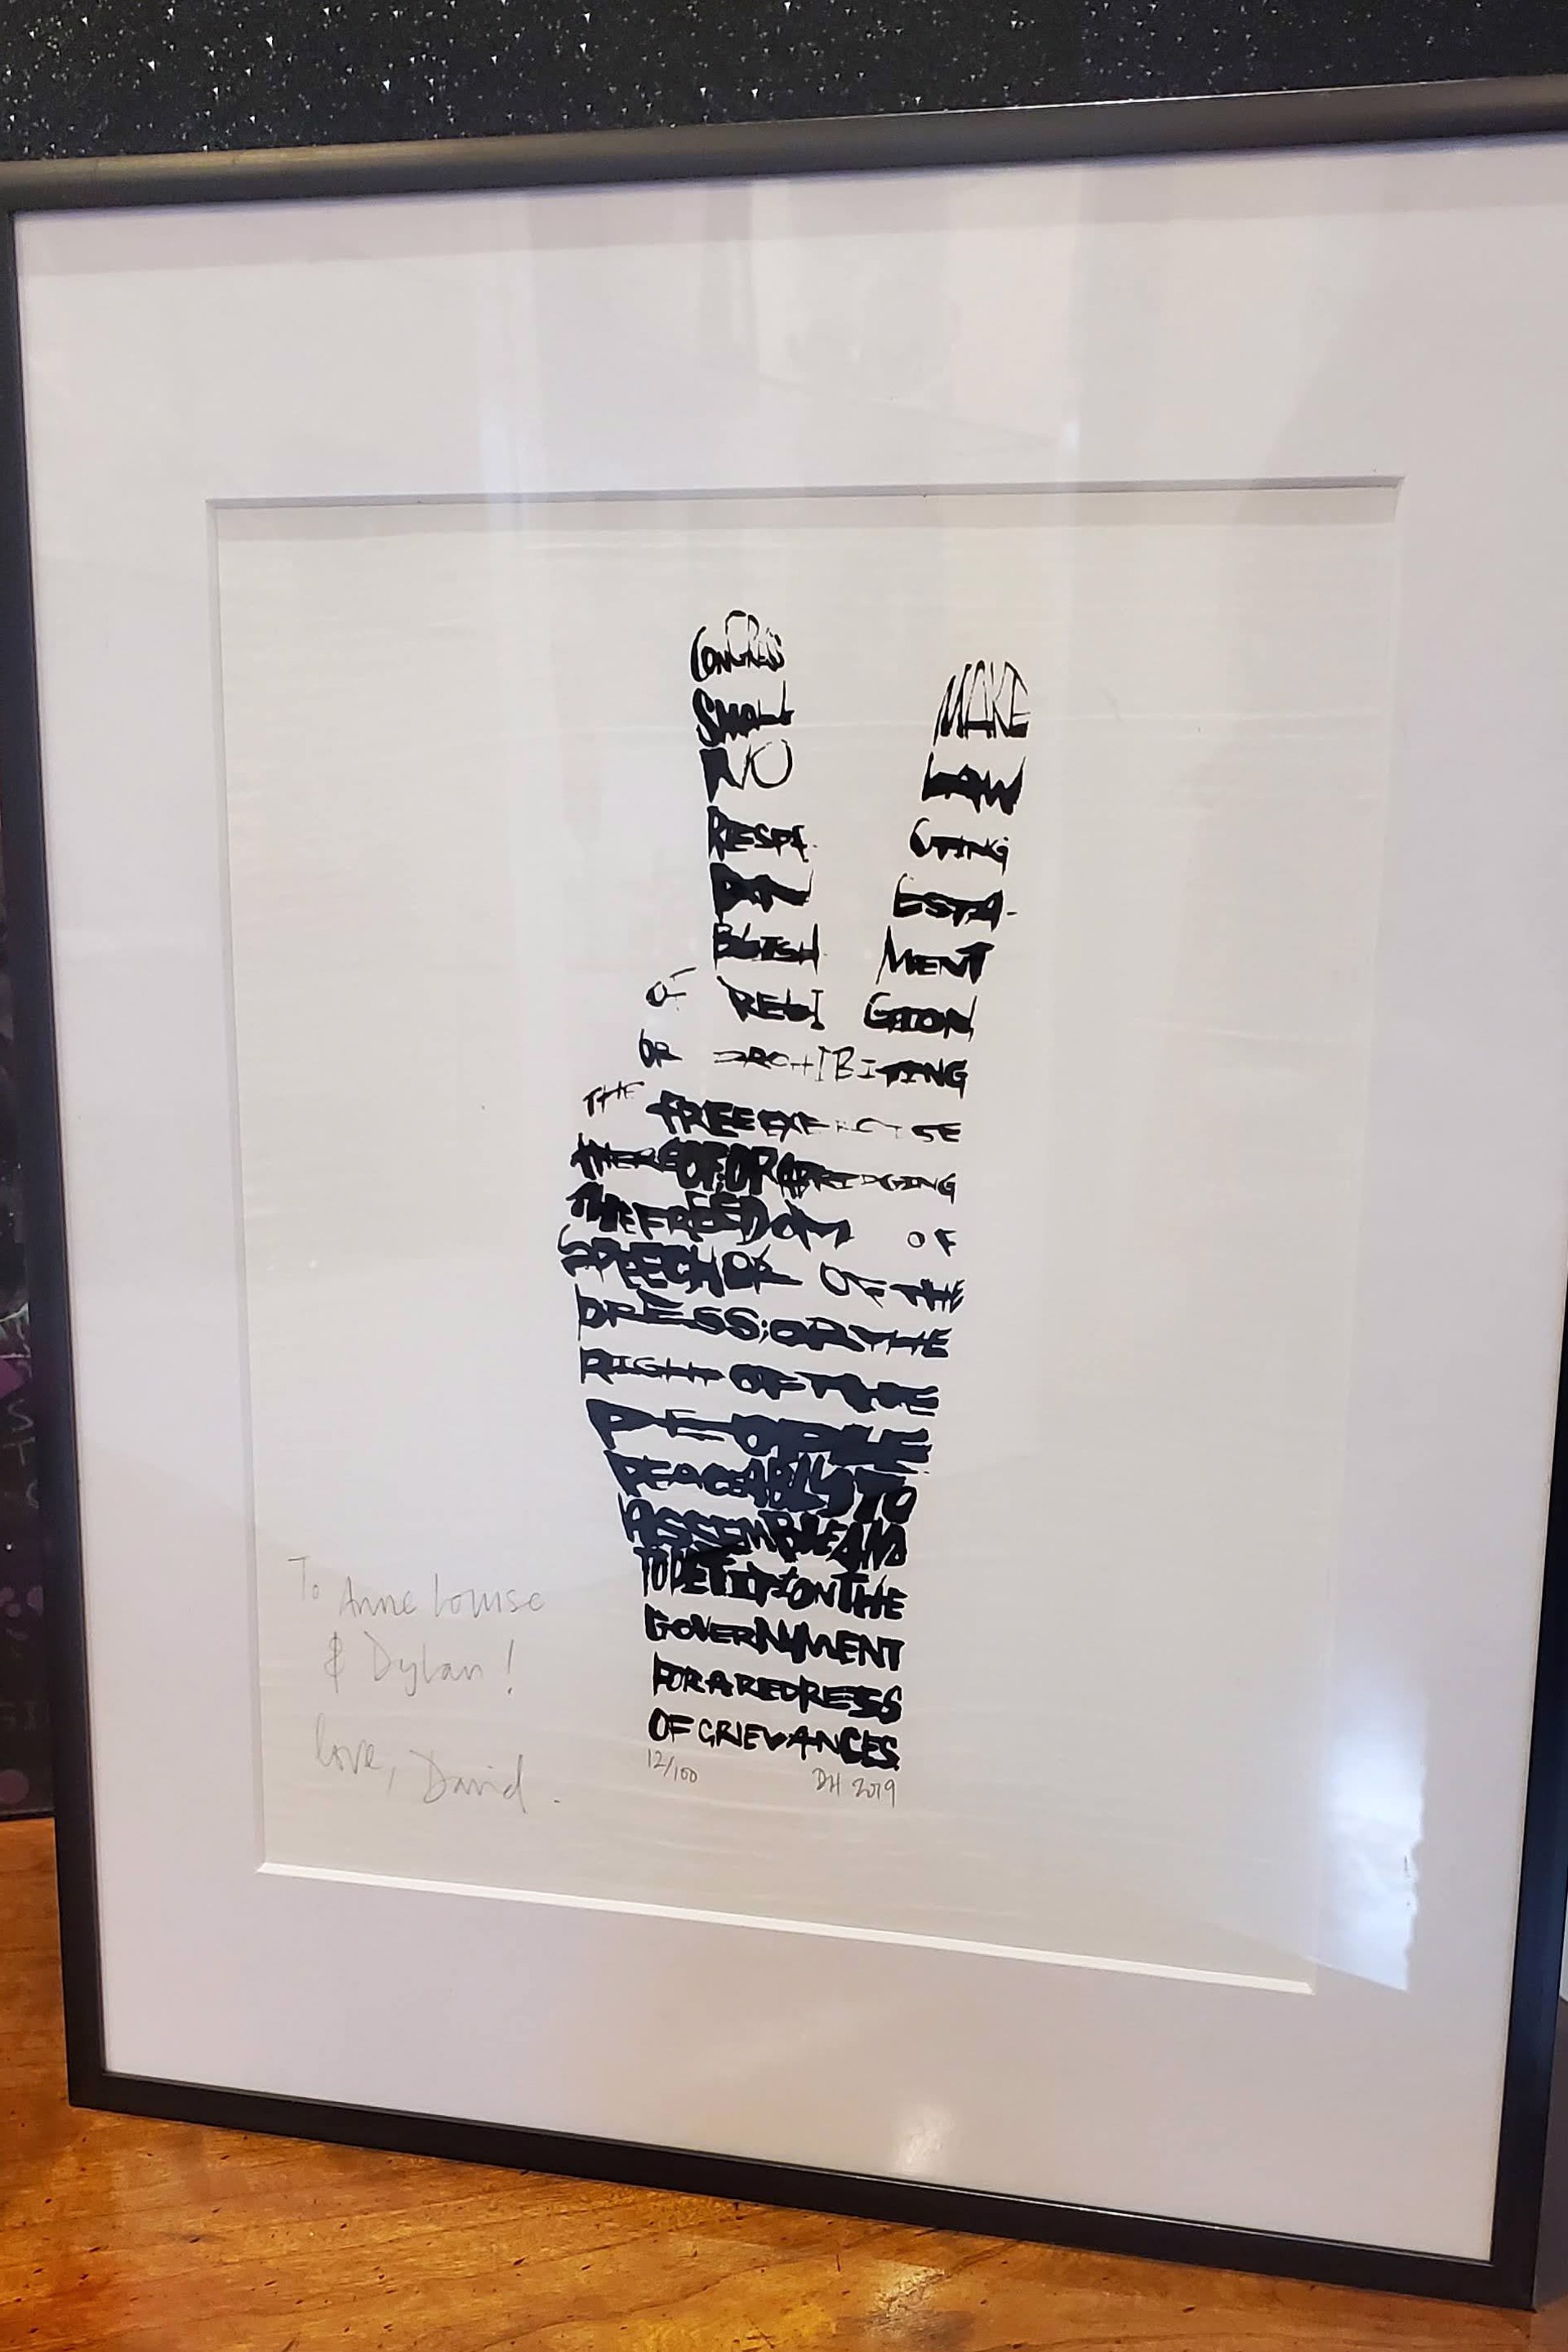 Limited Edition "First Amendment" Print, Signed by Artist by David Hollier